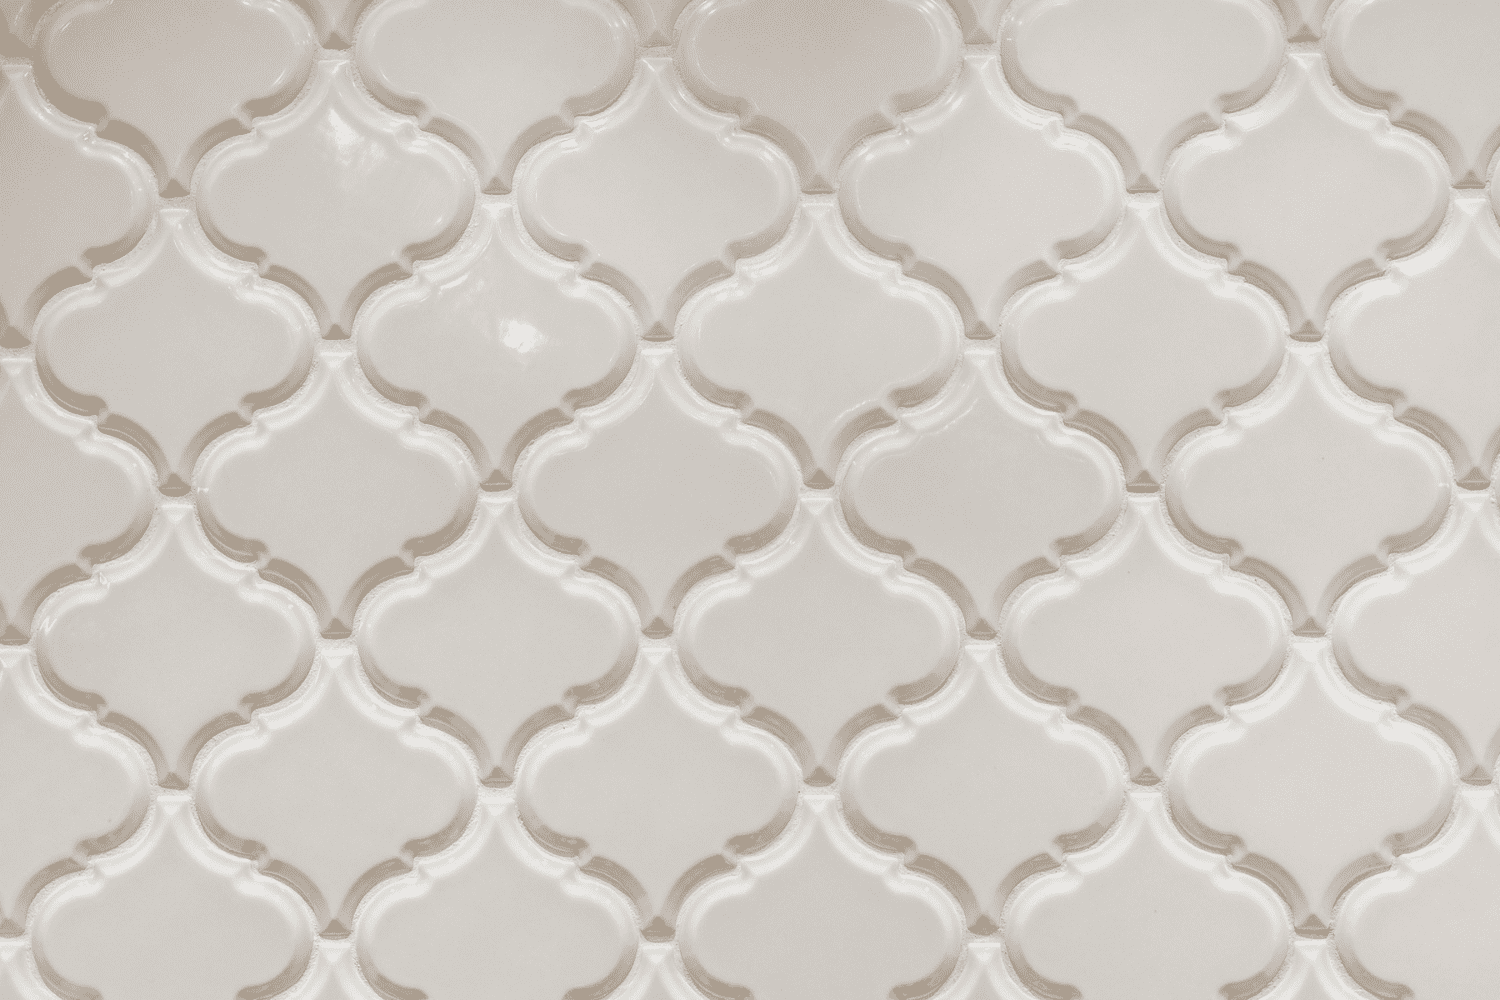 Nicholas Design Build | A close up of a white tile with a pattern on it.